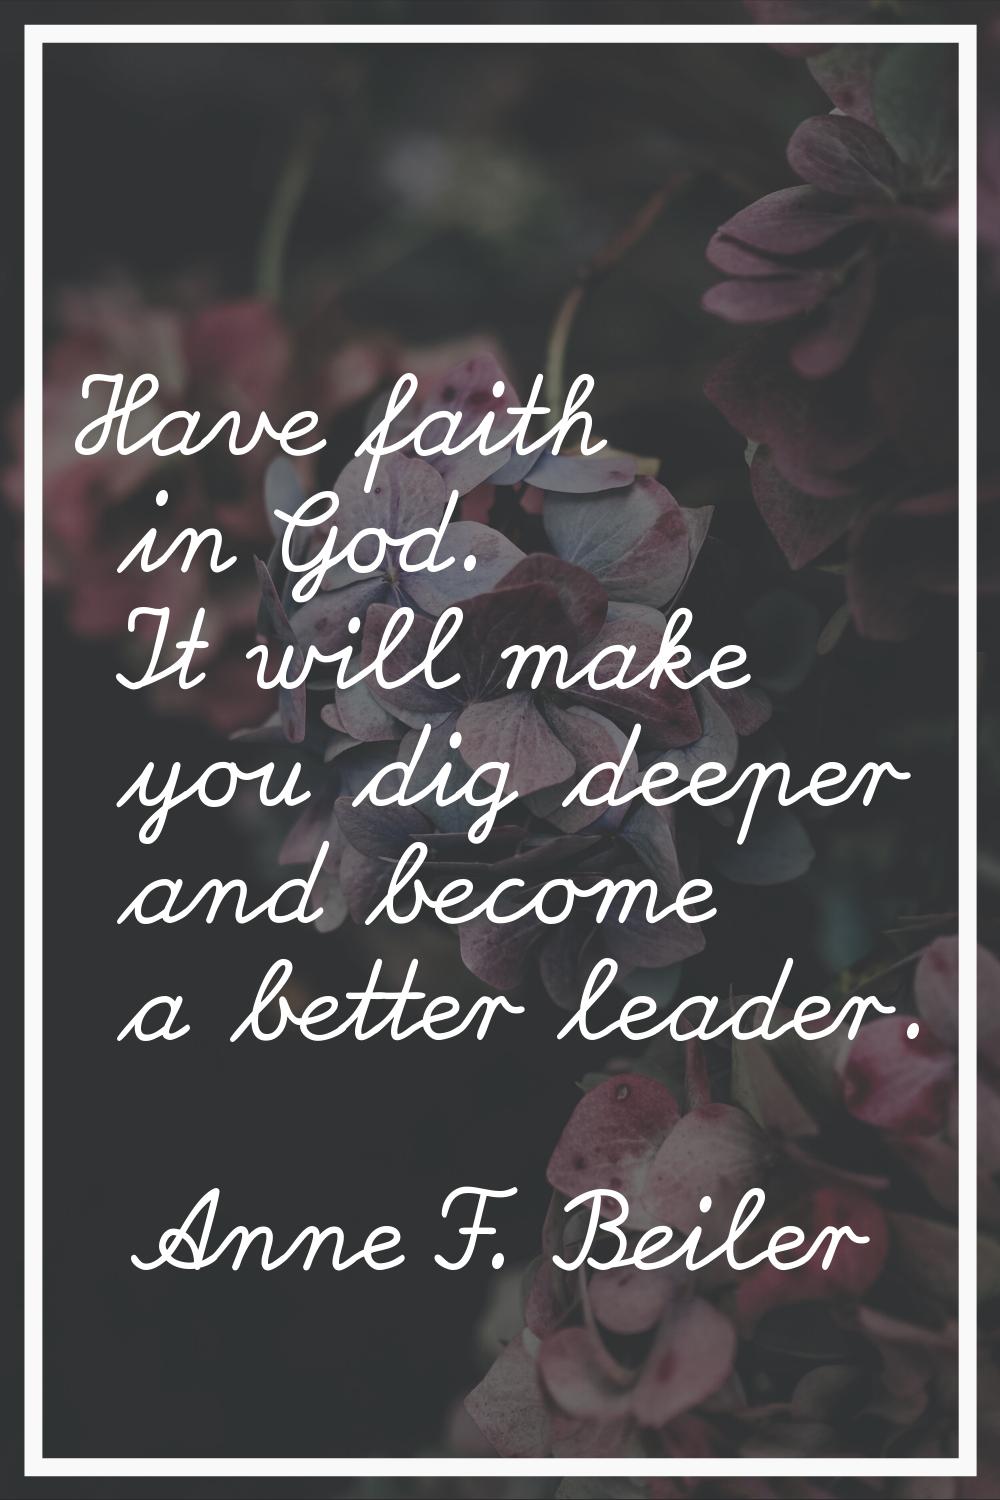 Have faith in God. It will make you dig deeper and become a better leader.